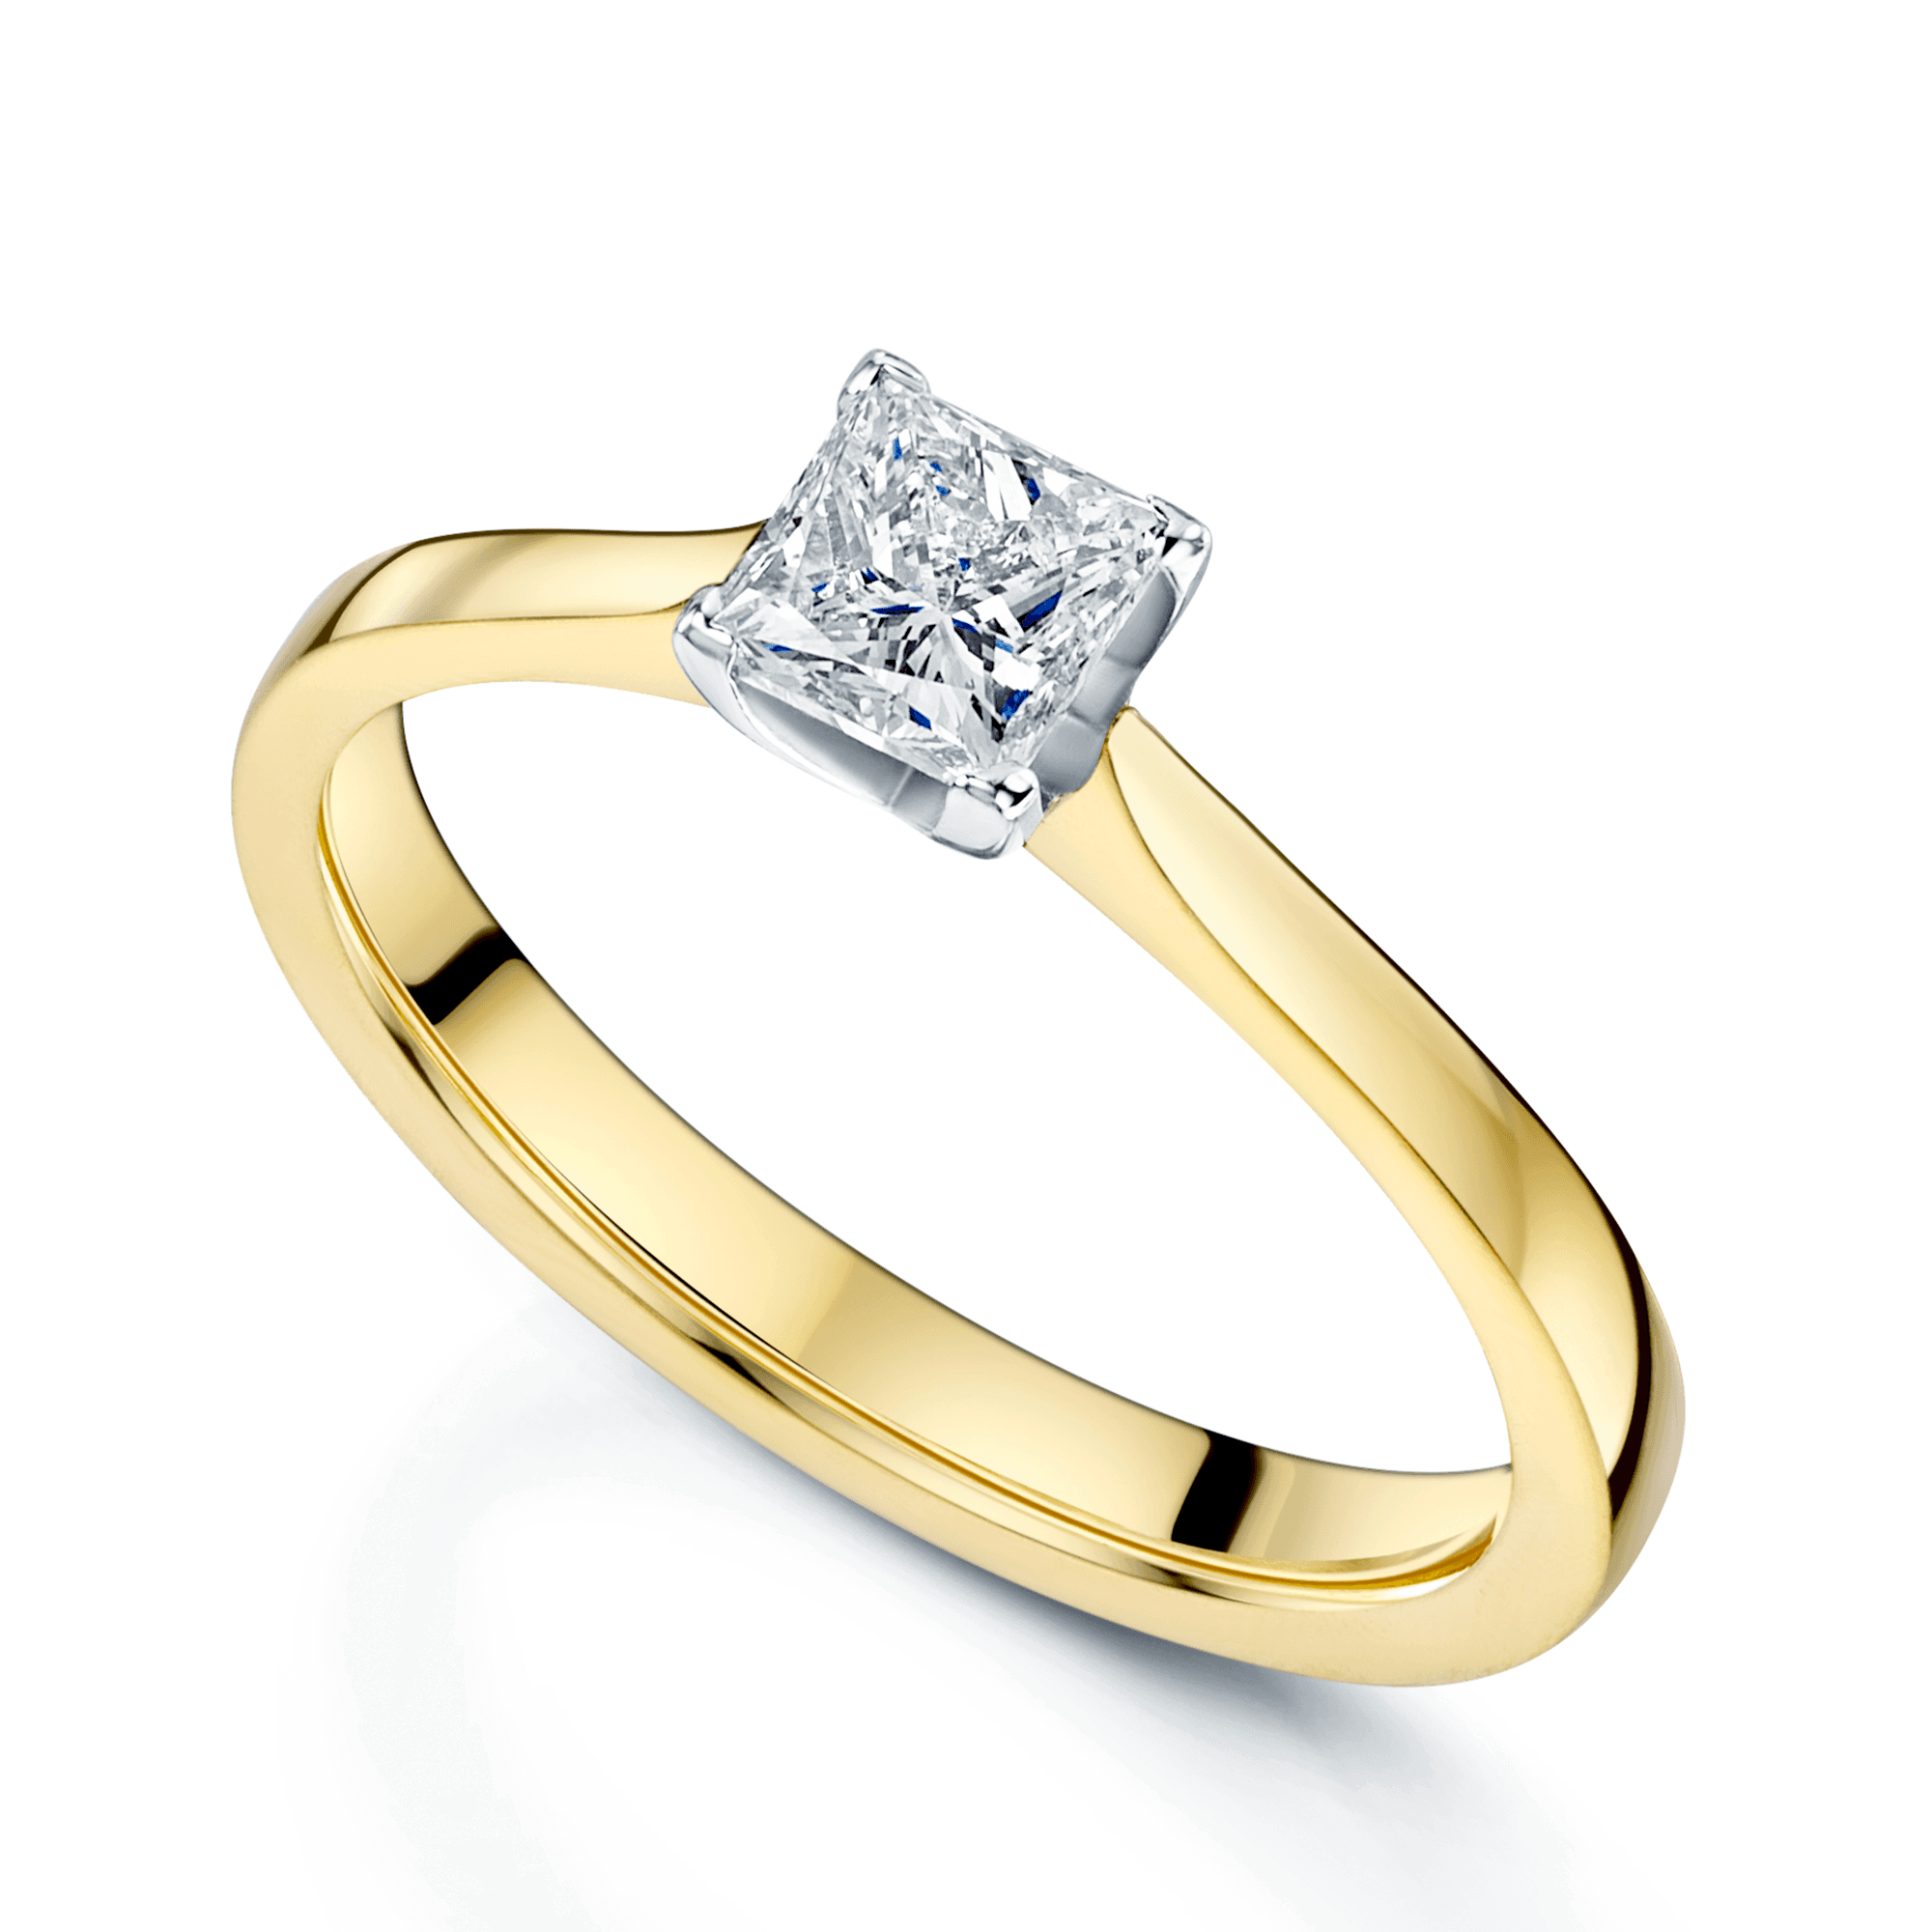 18ct Yellow Gold GIA 0.50 Carat Certificated Princess Cut Diamond Solitaire Ring